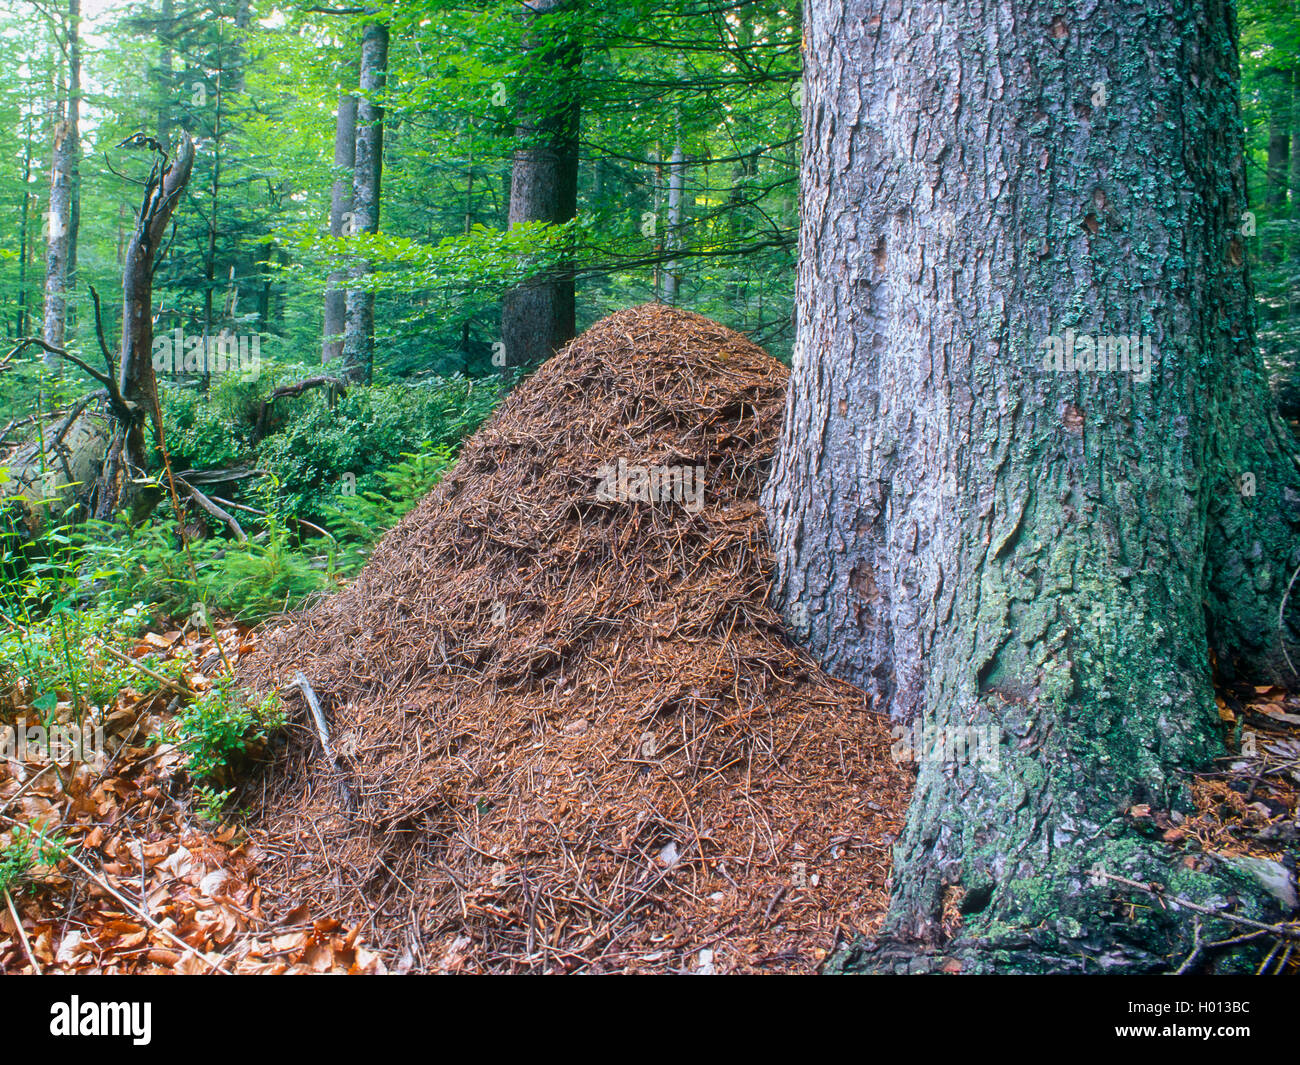 wood ant (Formica rufa), Anthill in the forest, Germany Stock Photo